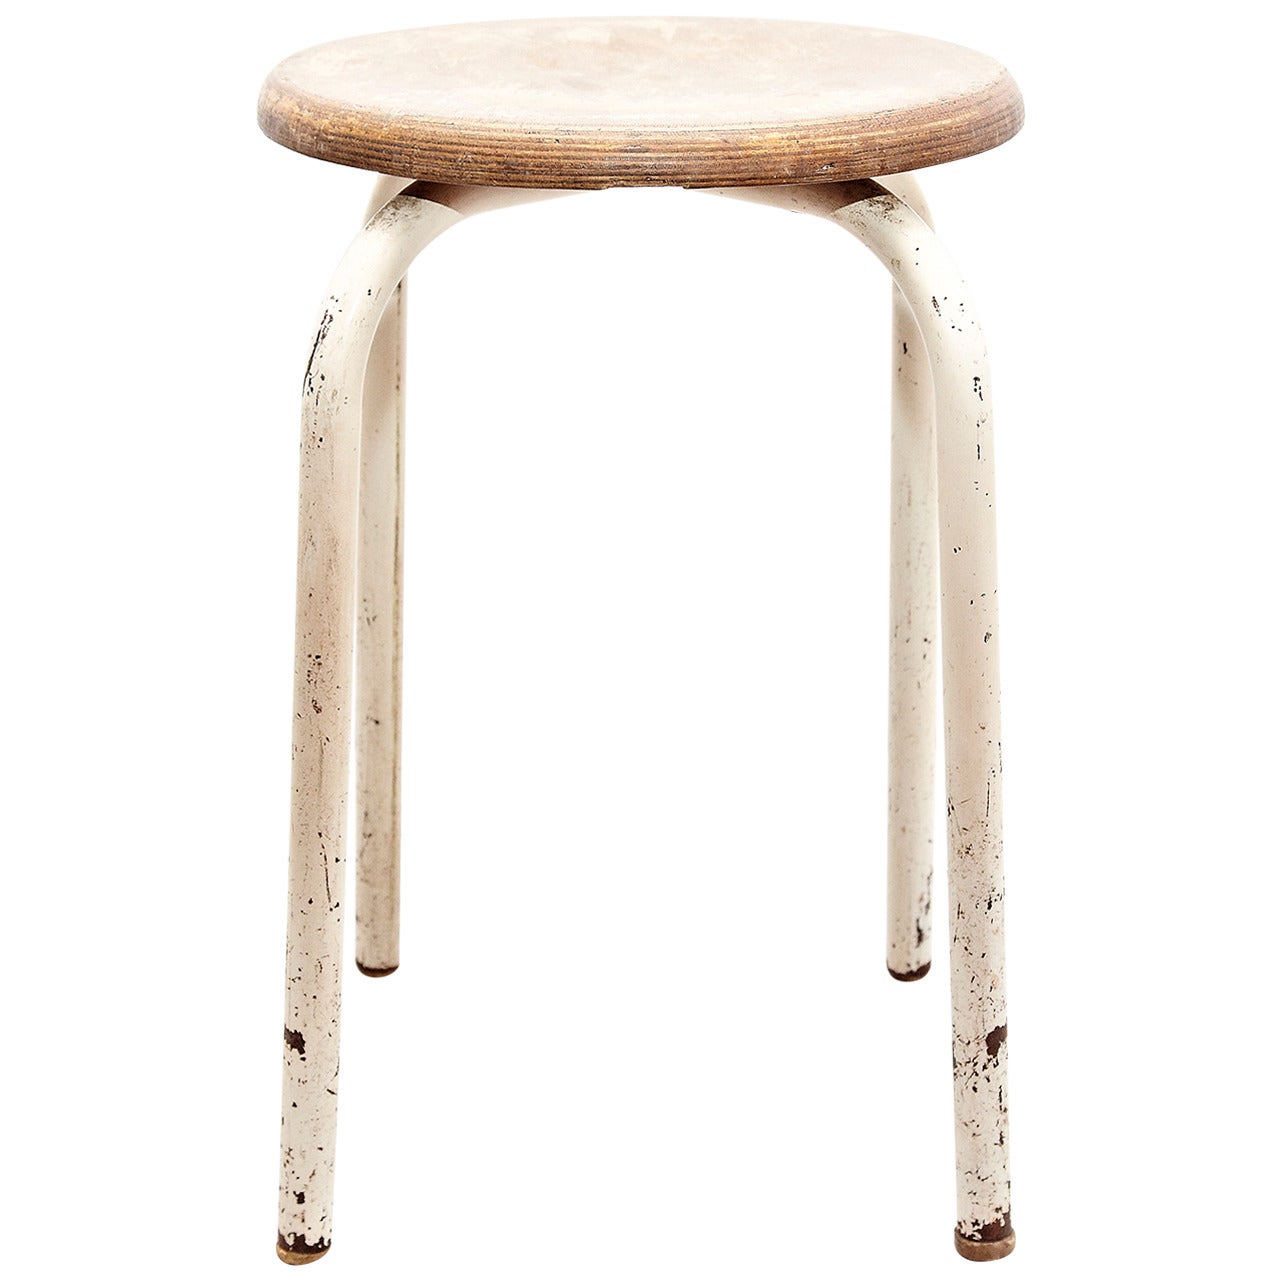 Stool Attributed to Jean Prouvé, circa 1950